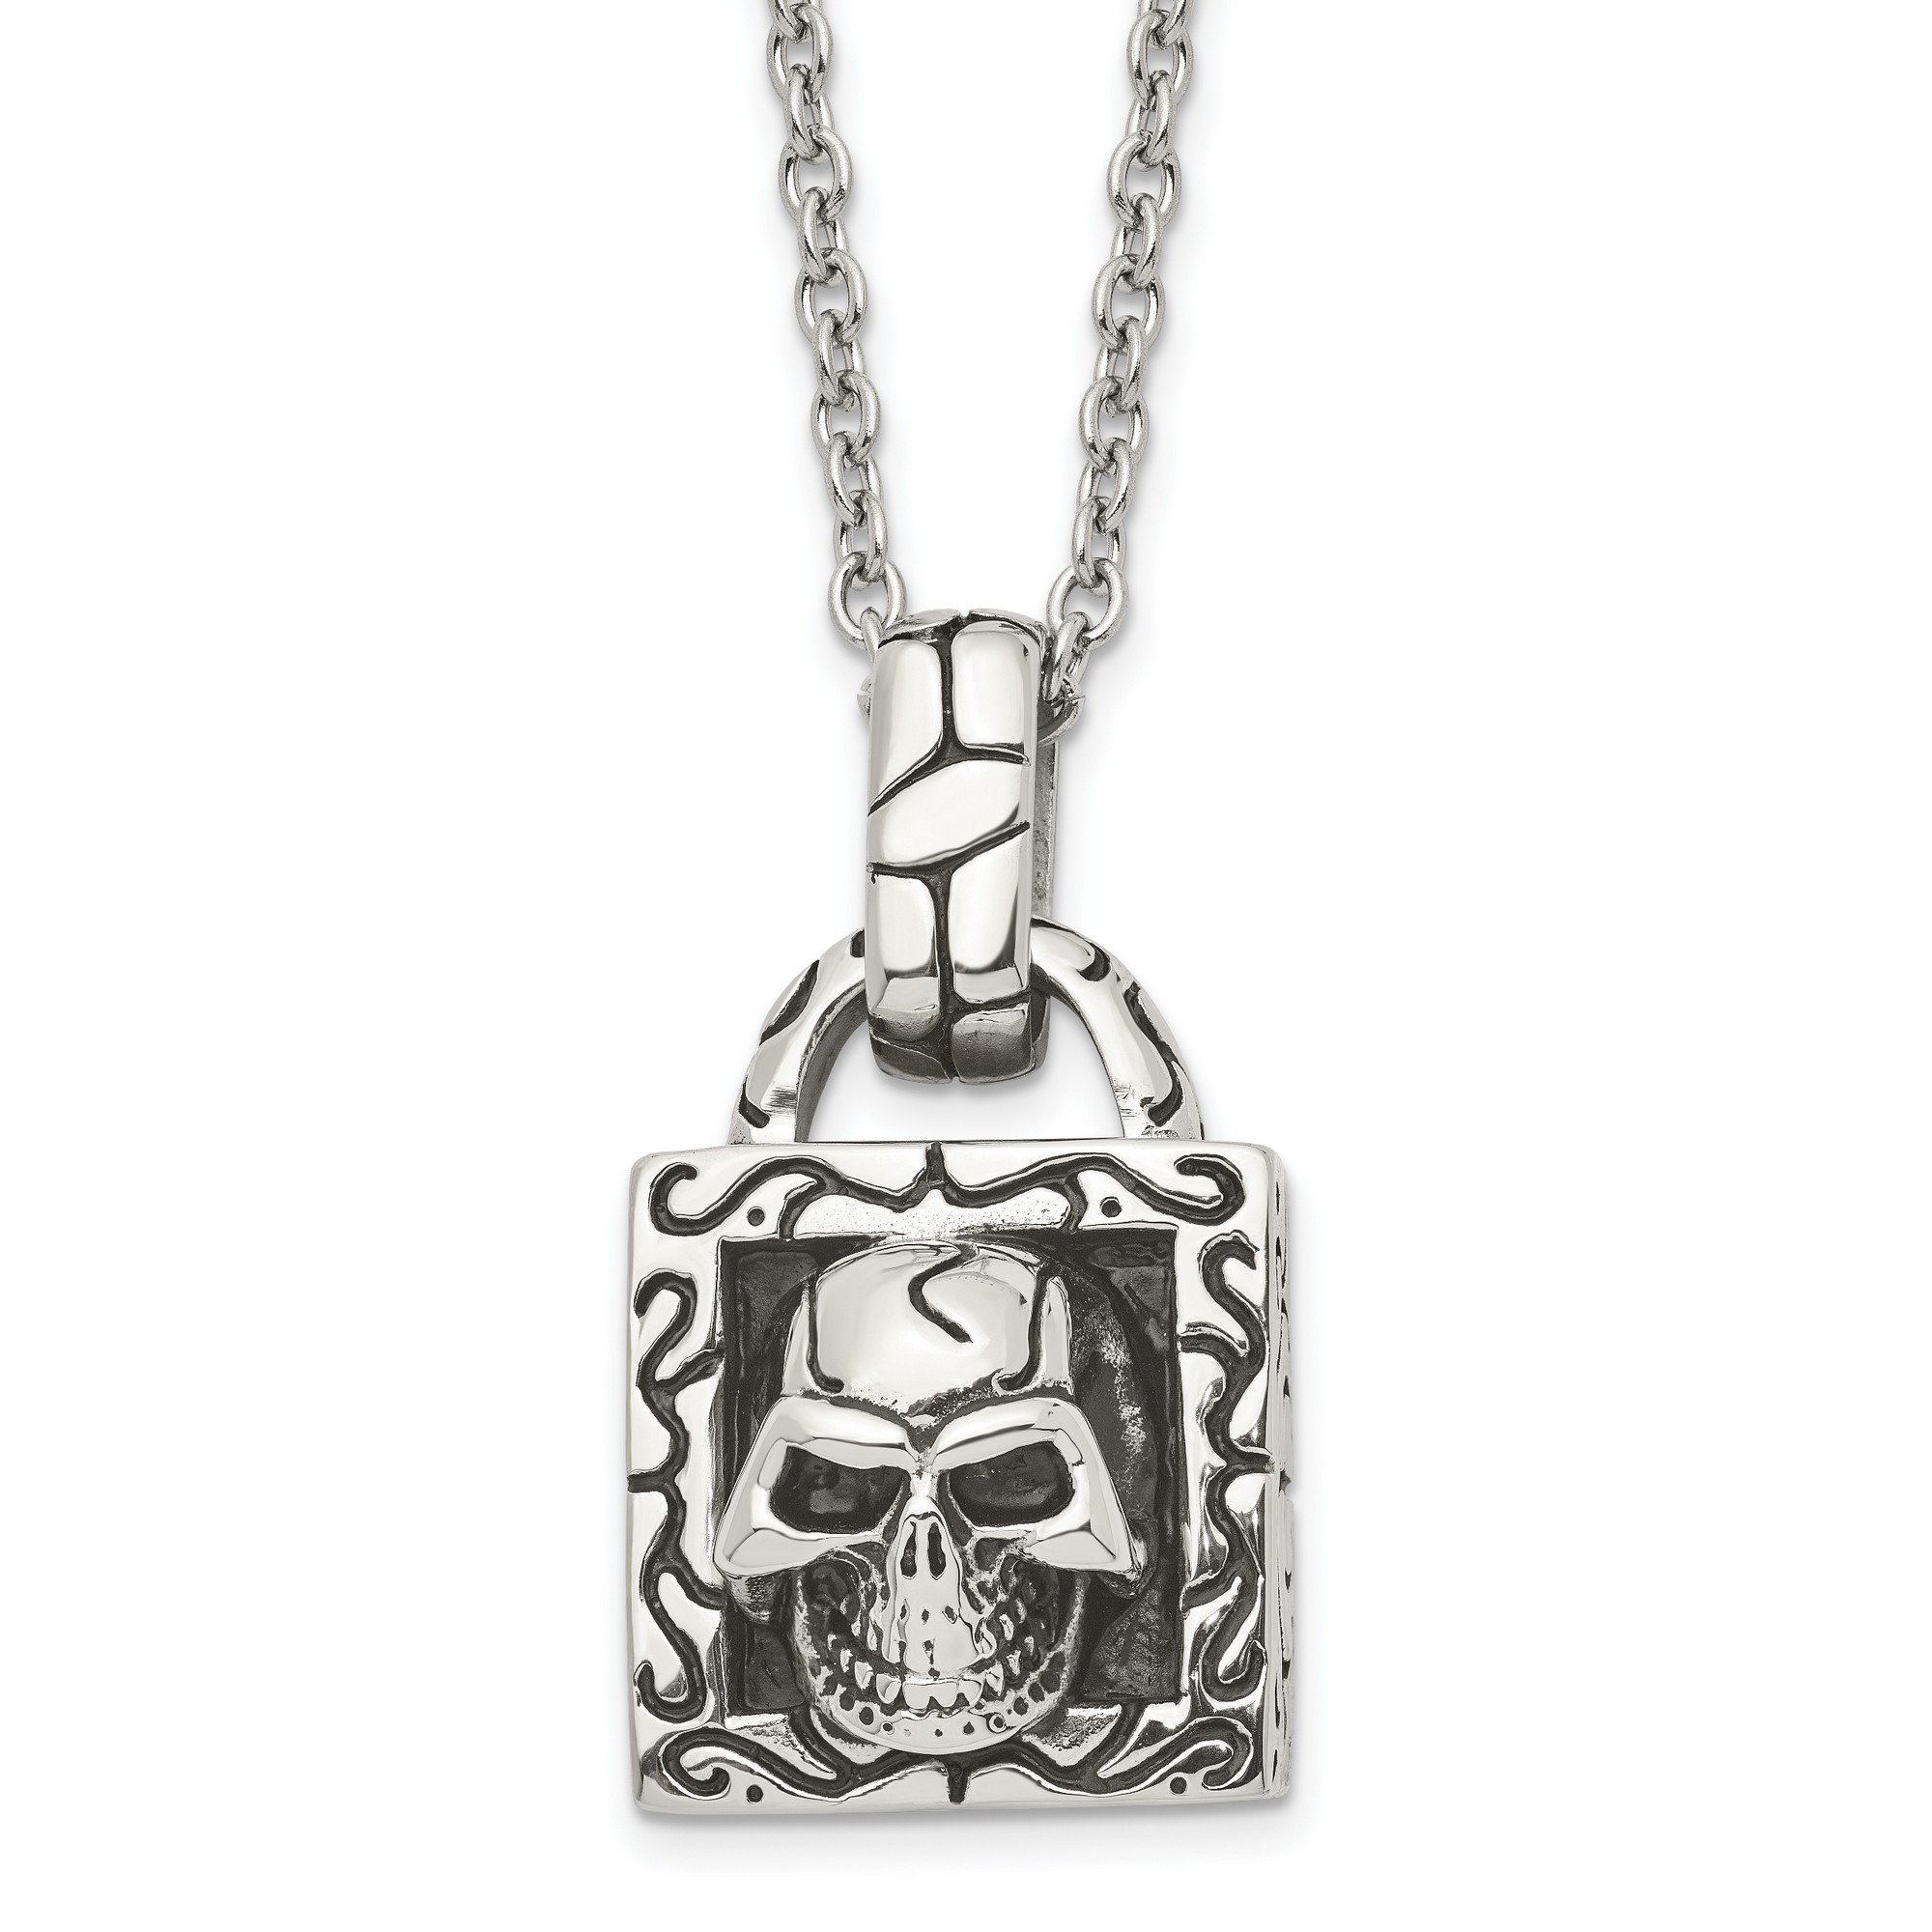 Shop4Silver Stainless Steel Polished And Antiqued Skull Necklace